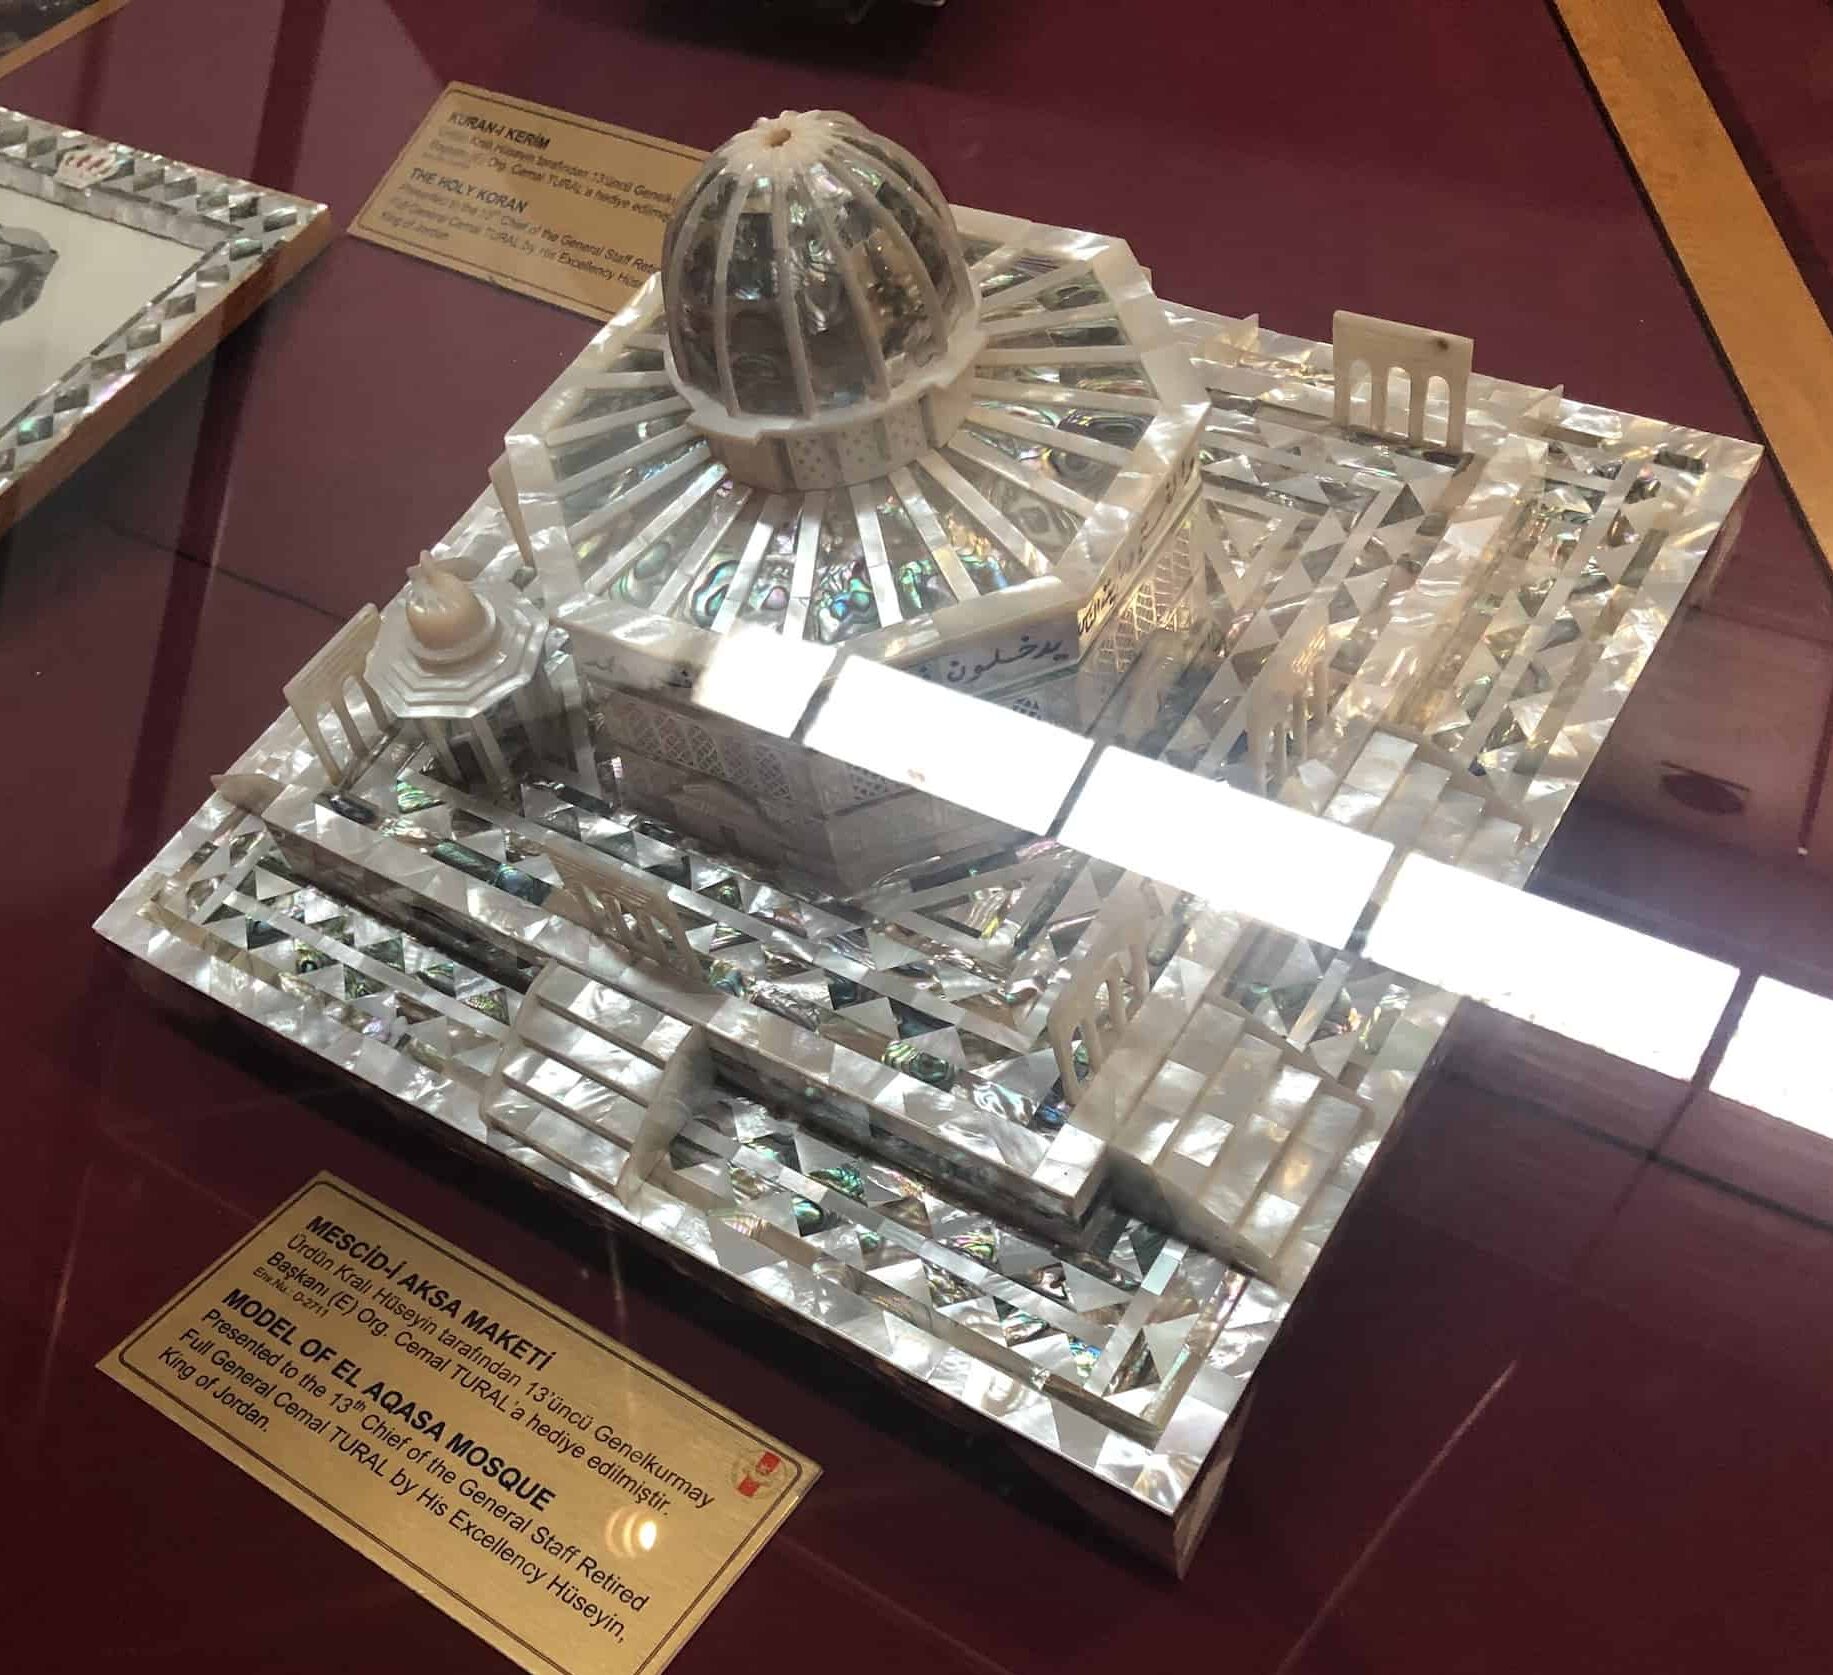 Model of the Al-Aqsa Mosque given to General Cemal Tural (1905-1981) by King Hussein of Jordan